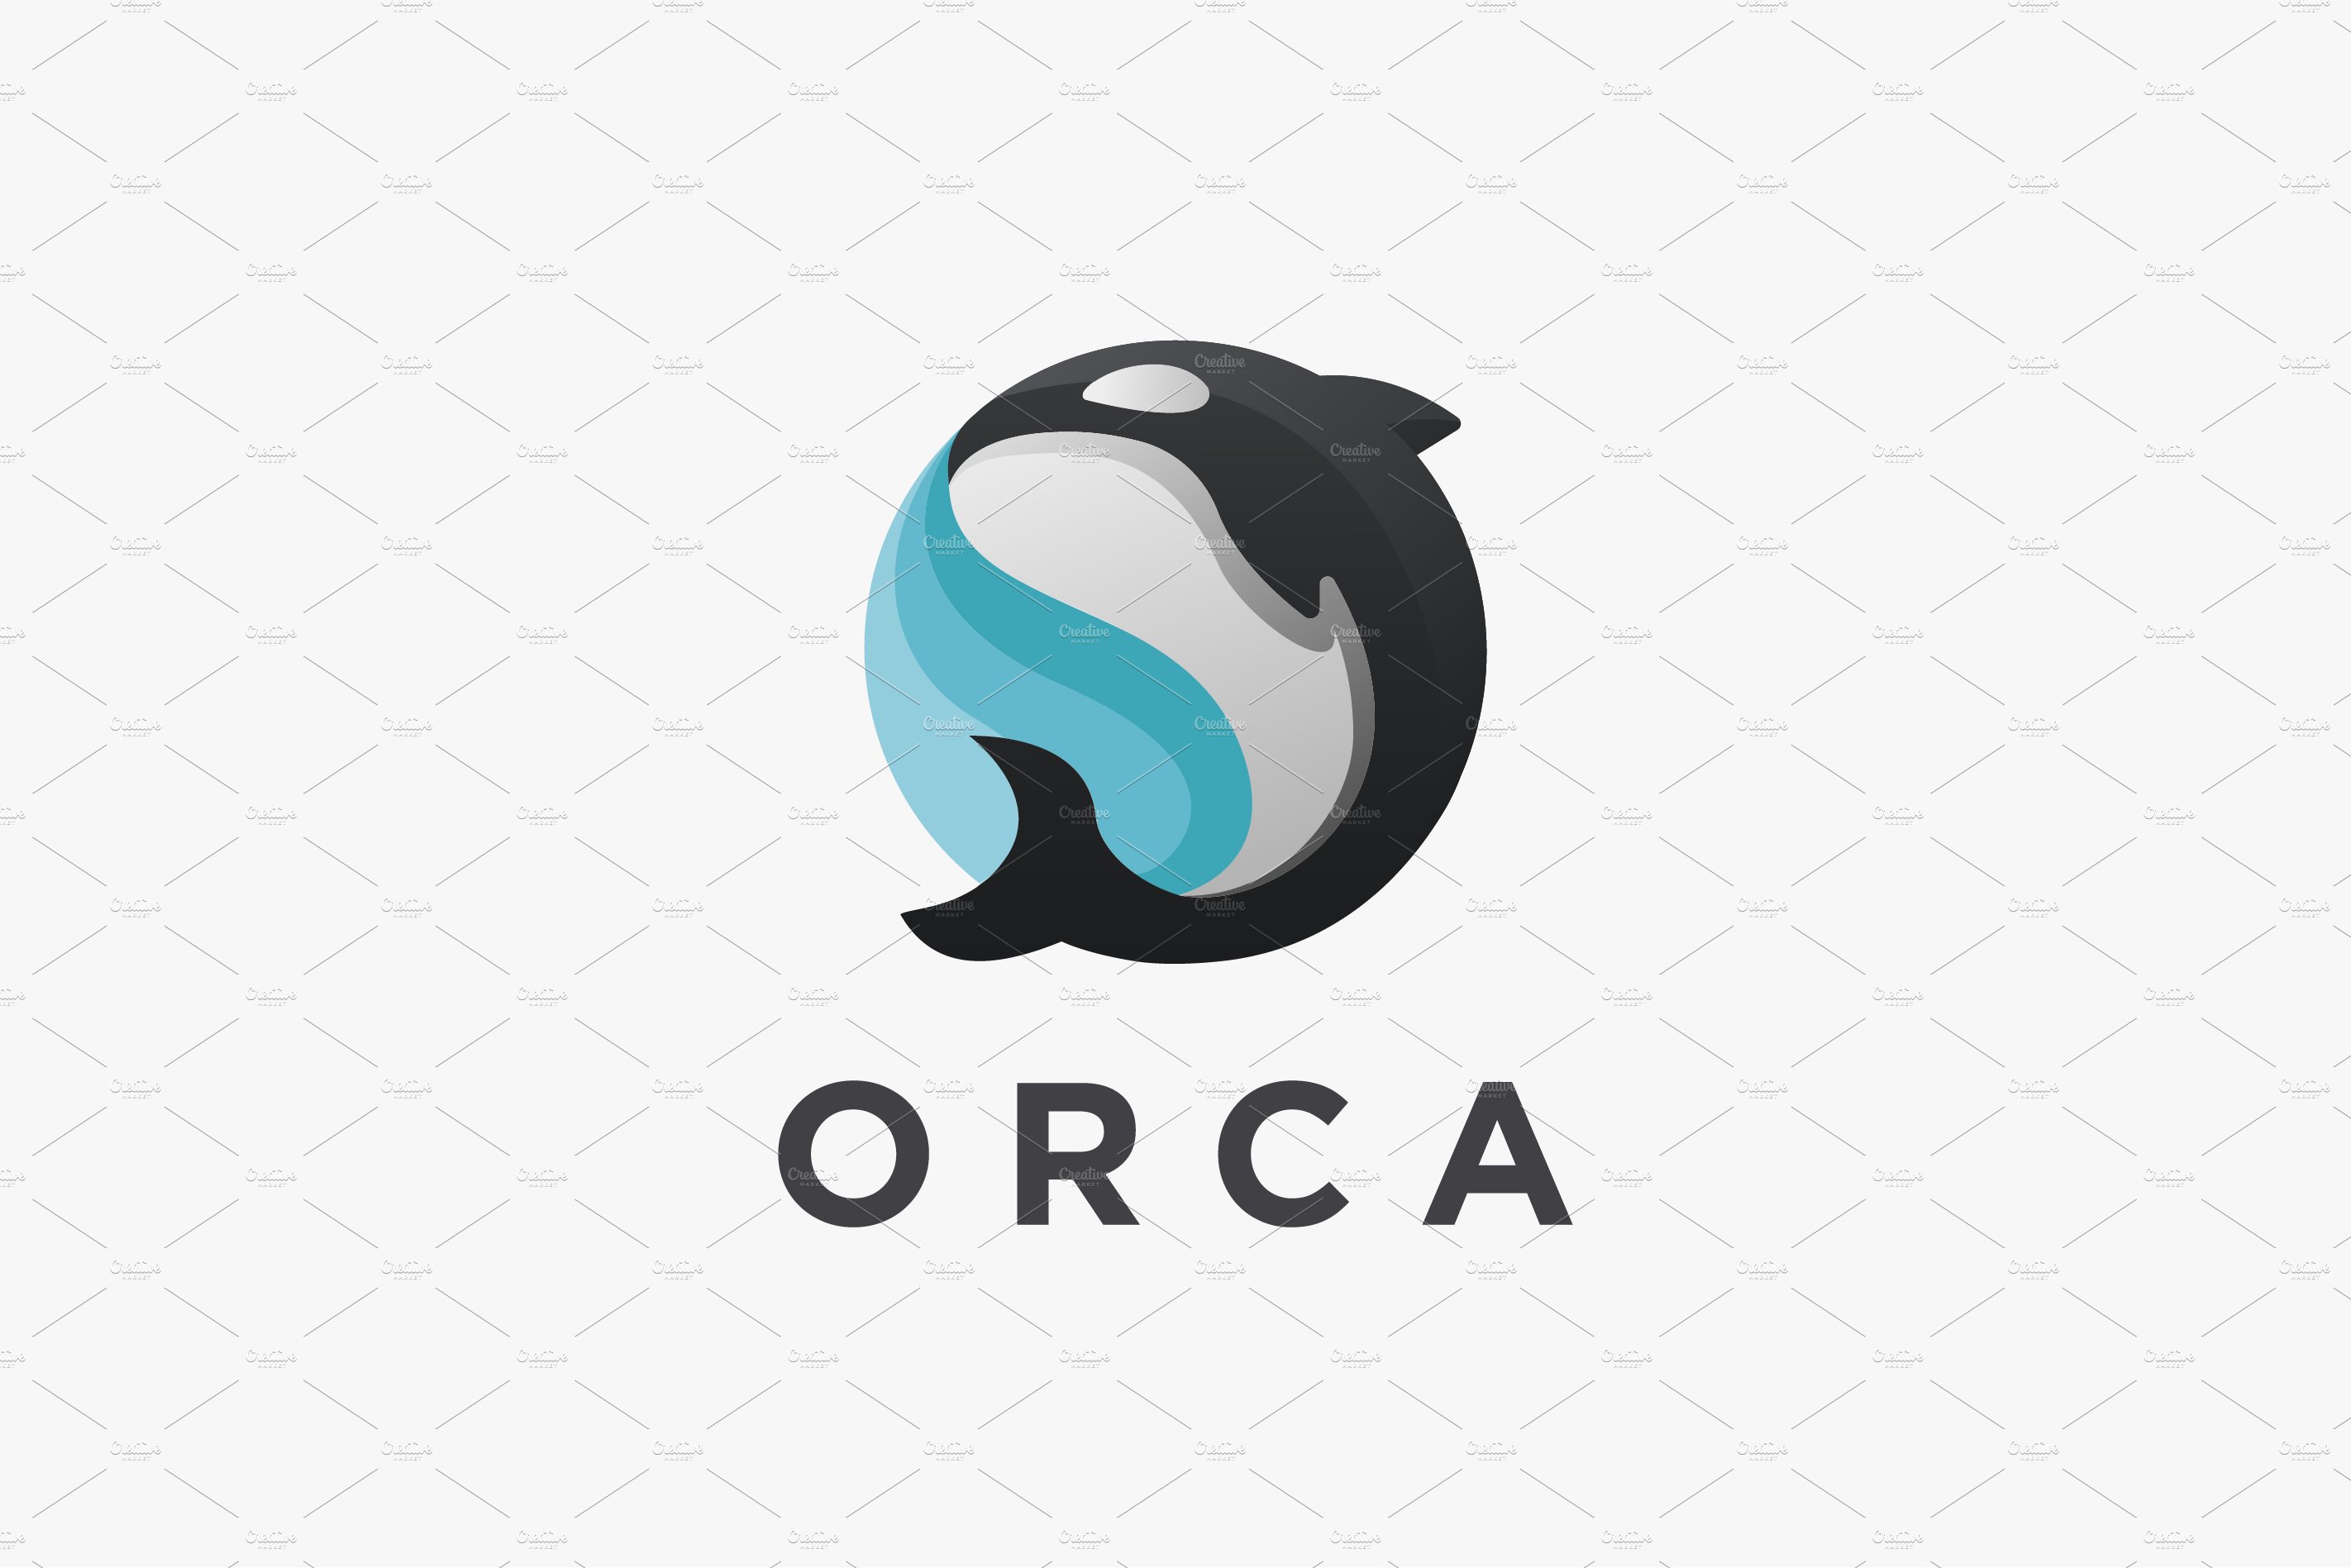 Jumping orca killer whale logo cover image.